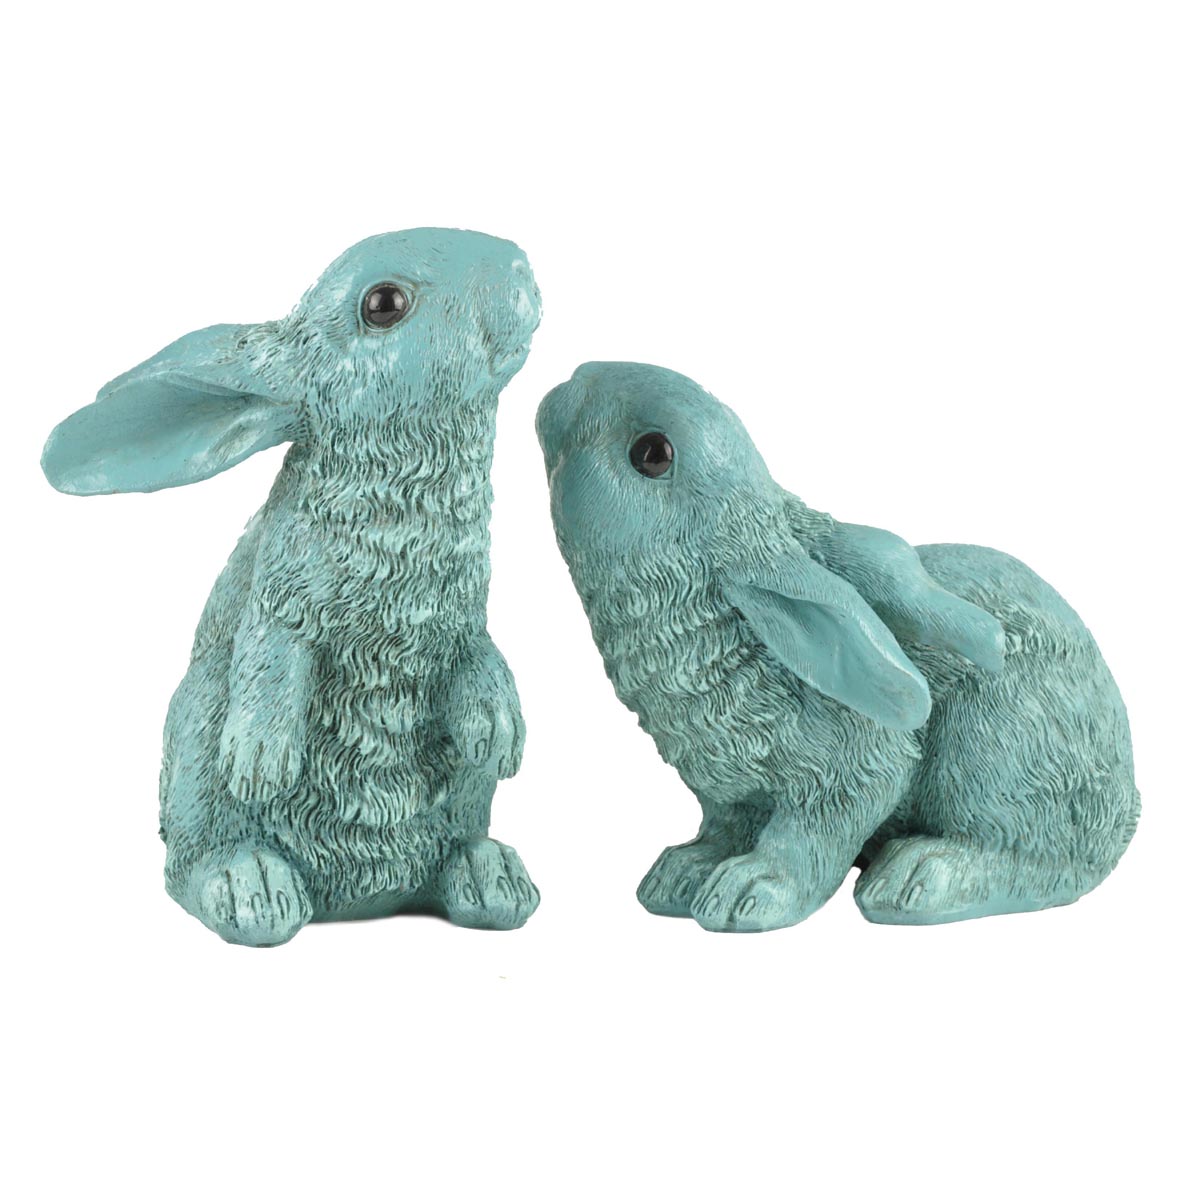 Ennas free sample easter rabbit statues handmade crafts for holiday gift